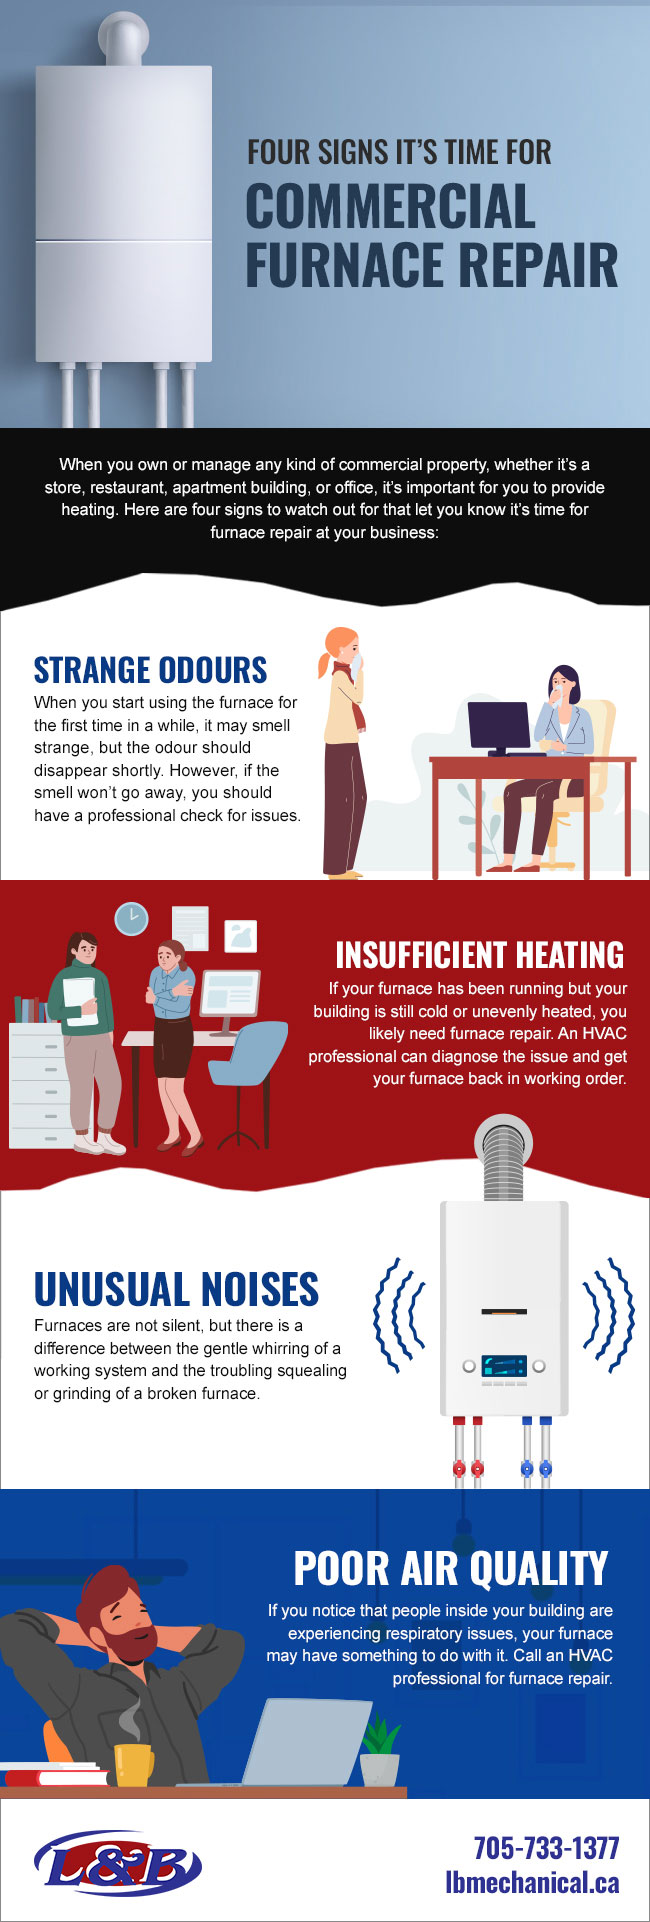 Four Signs It’s Time for Commercial Furnace Repair 